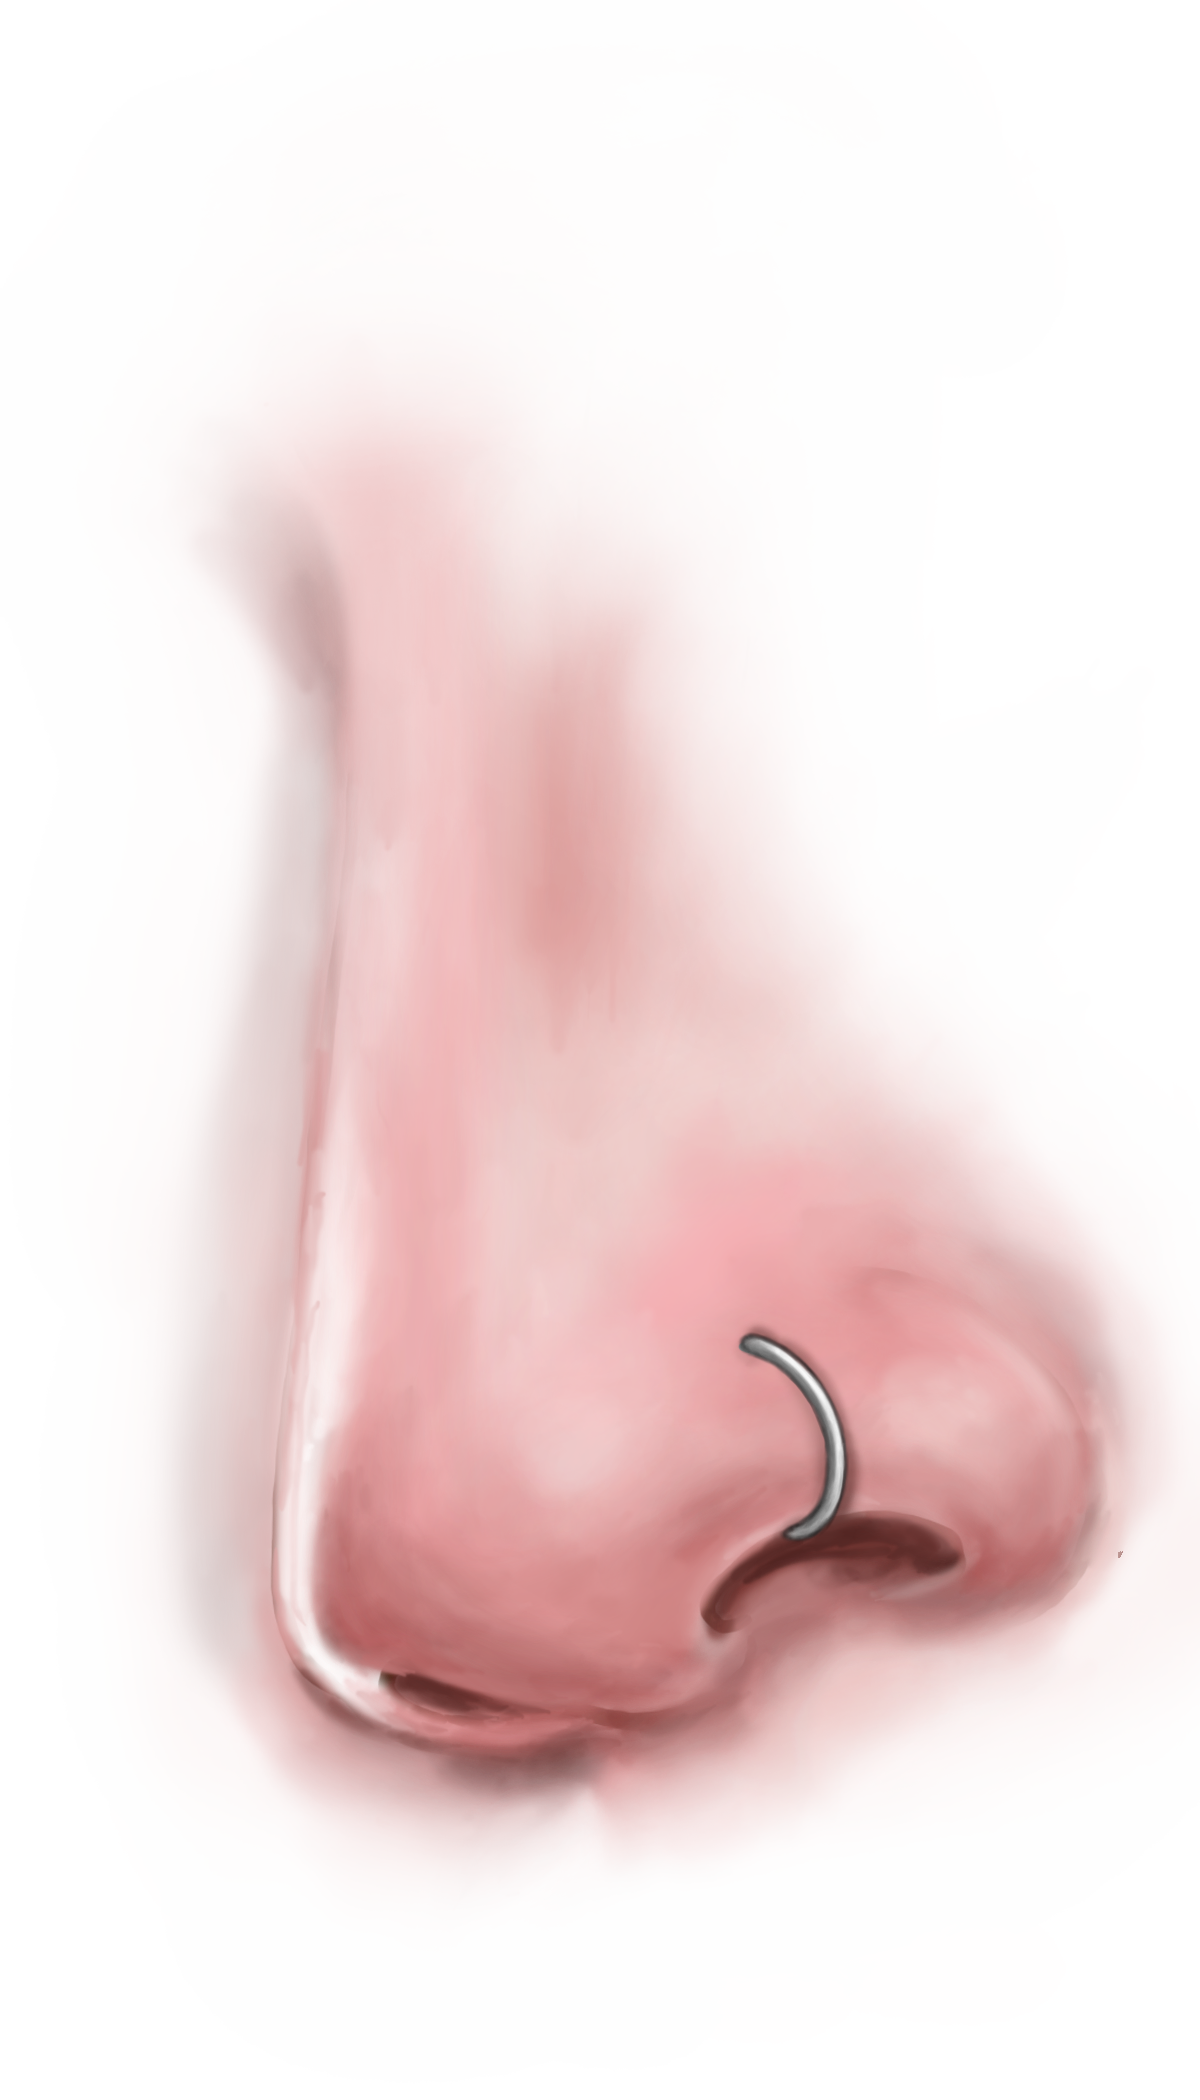 A Nose With A Piercing